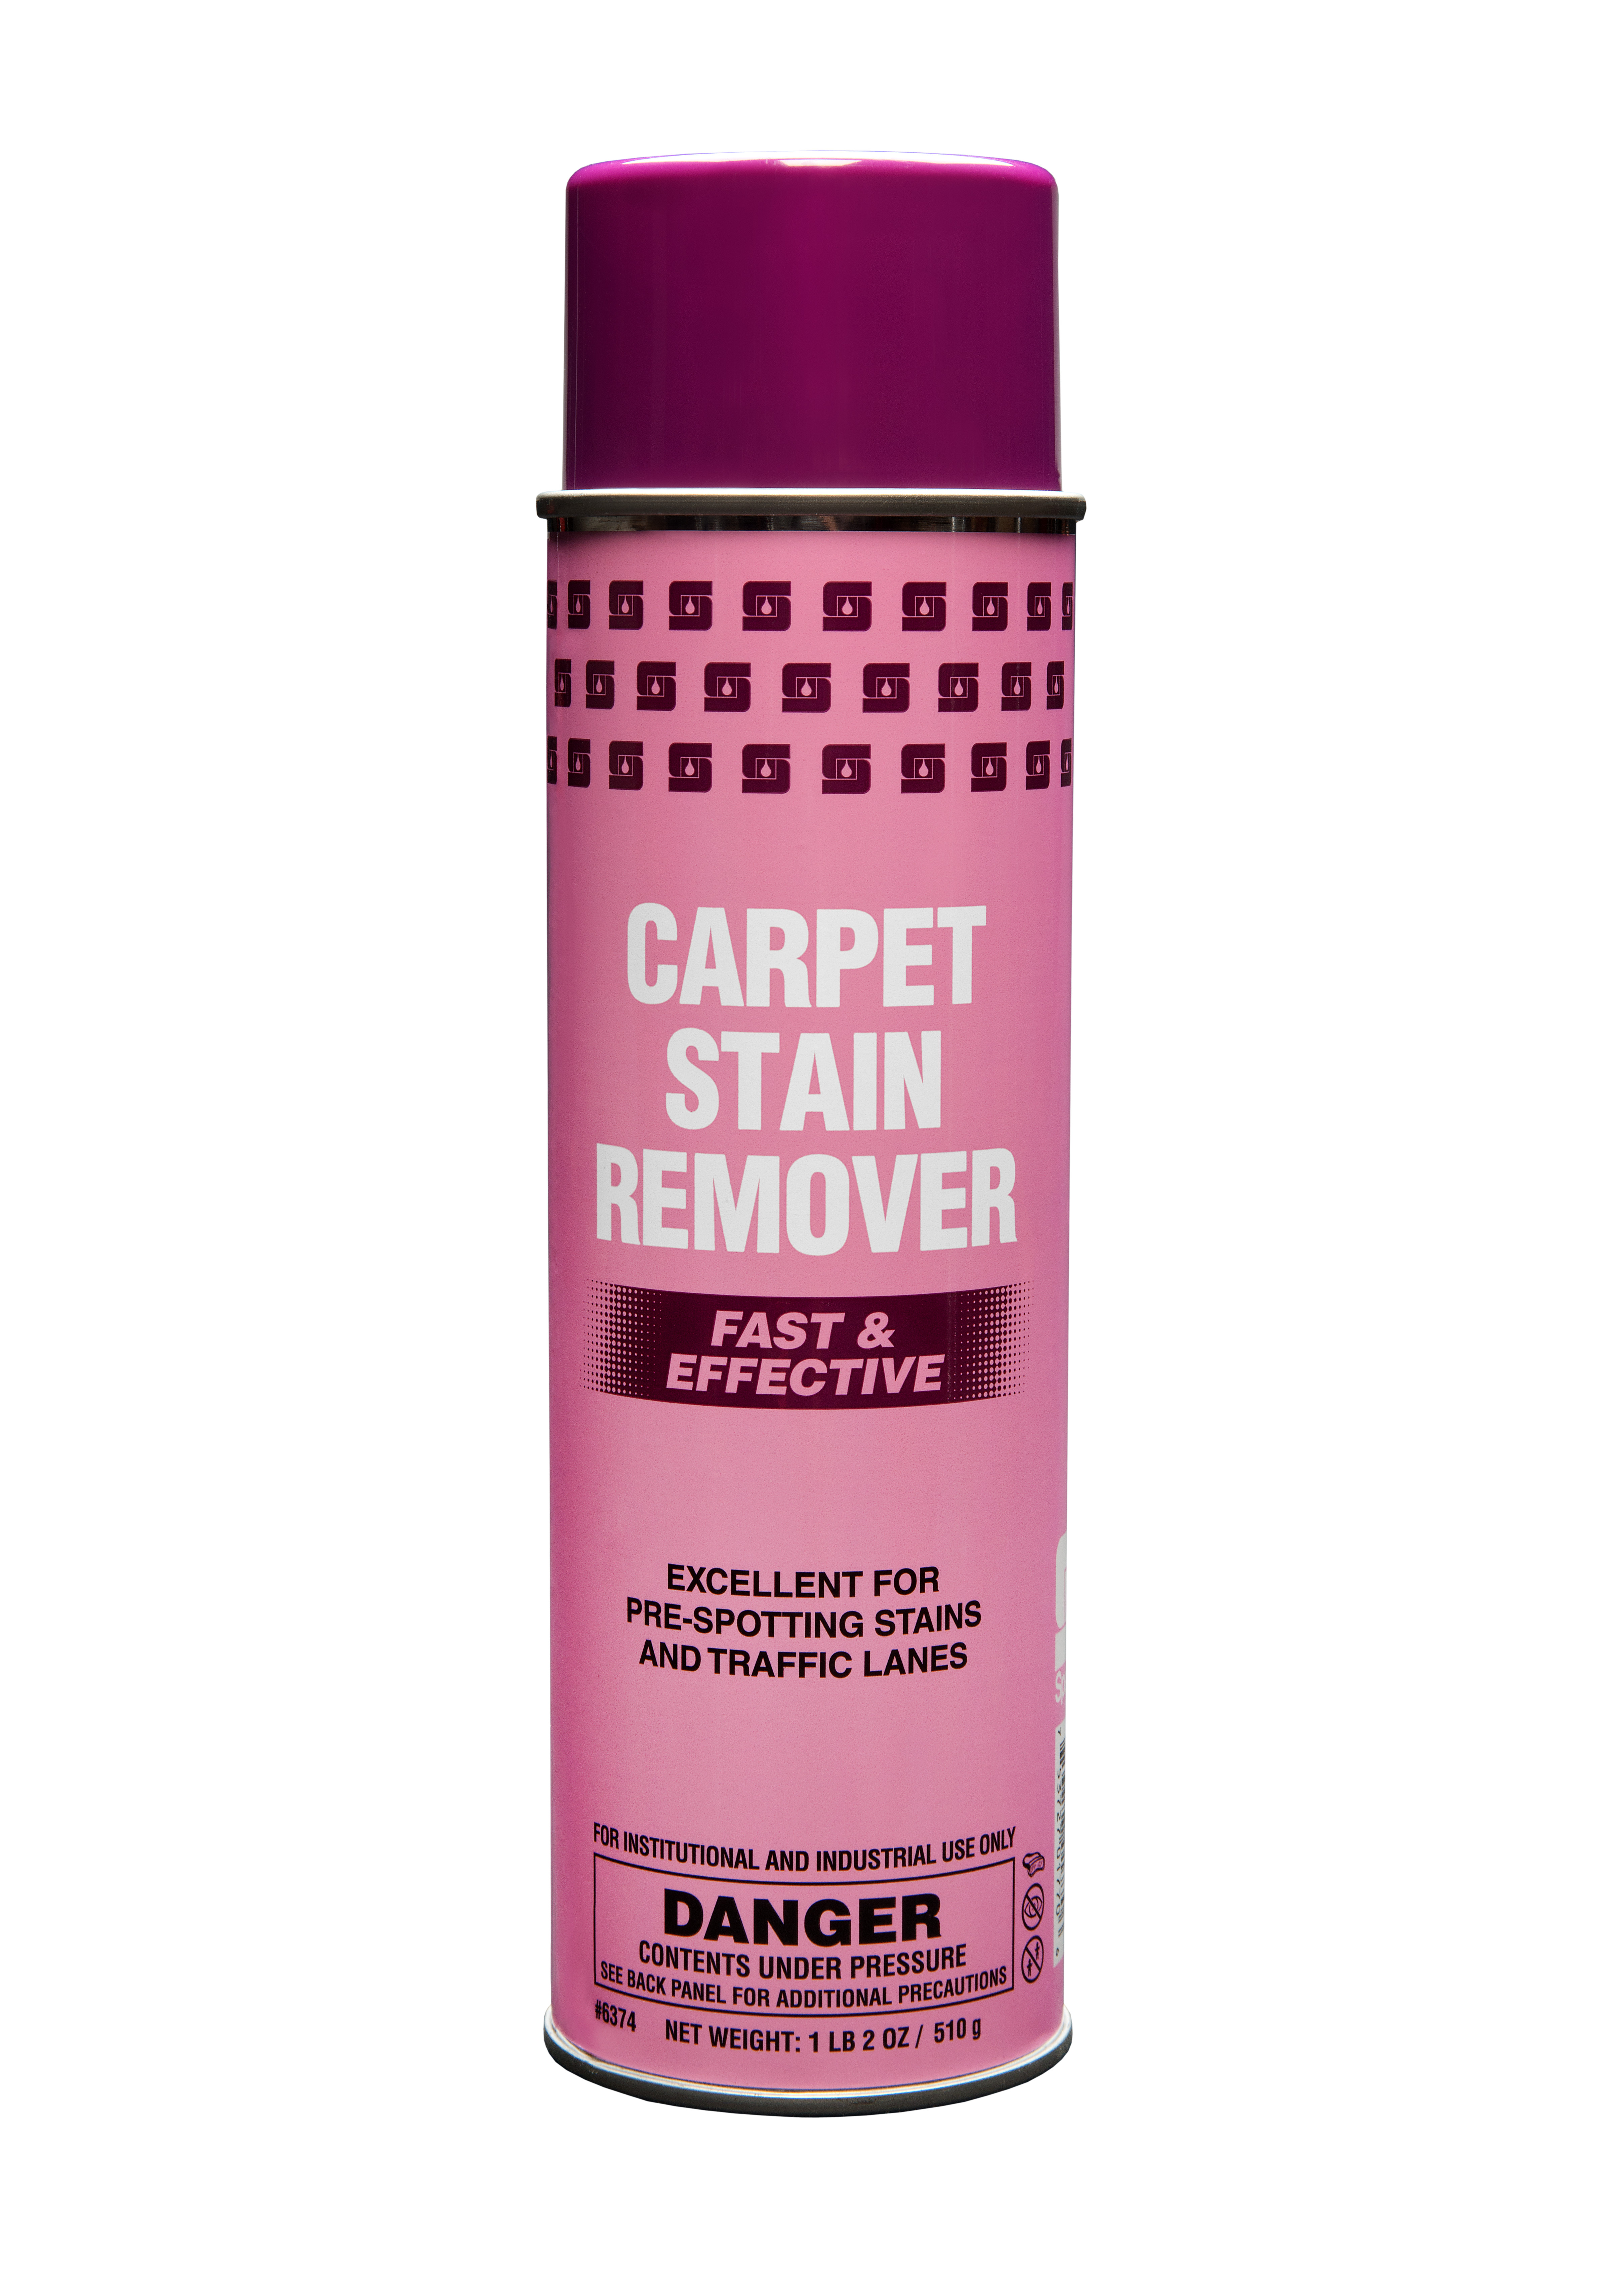 Spartan Chemical Company Carpet Stain Remover, 12-20 OZ.CAN